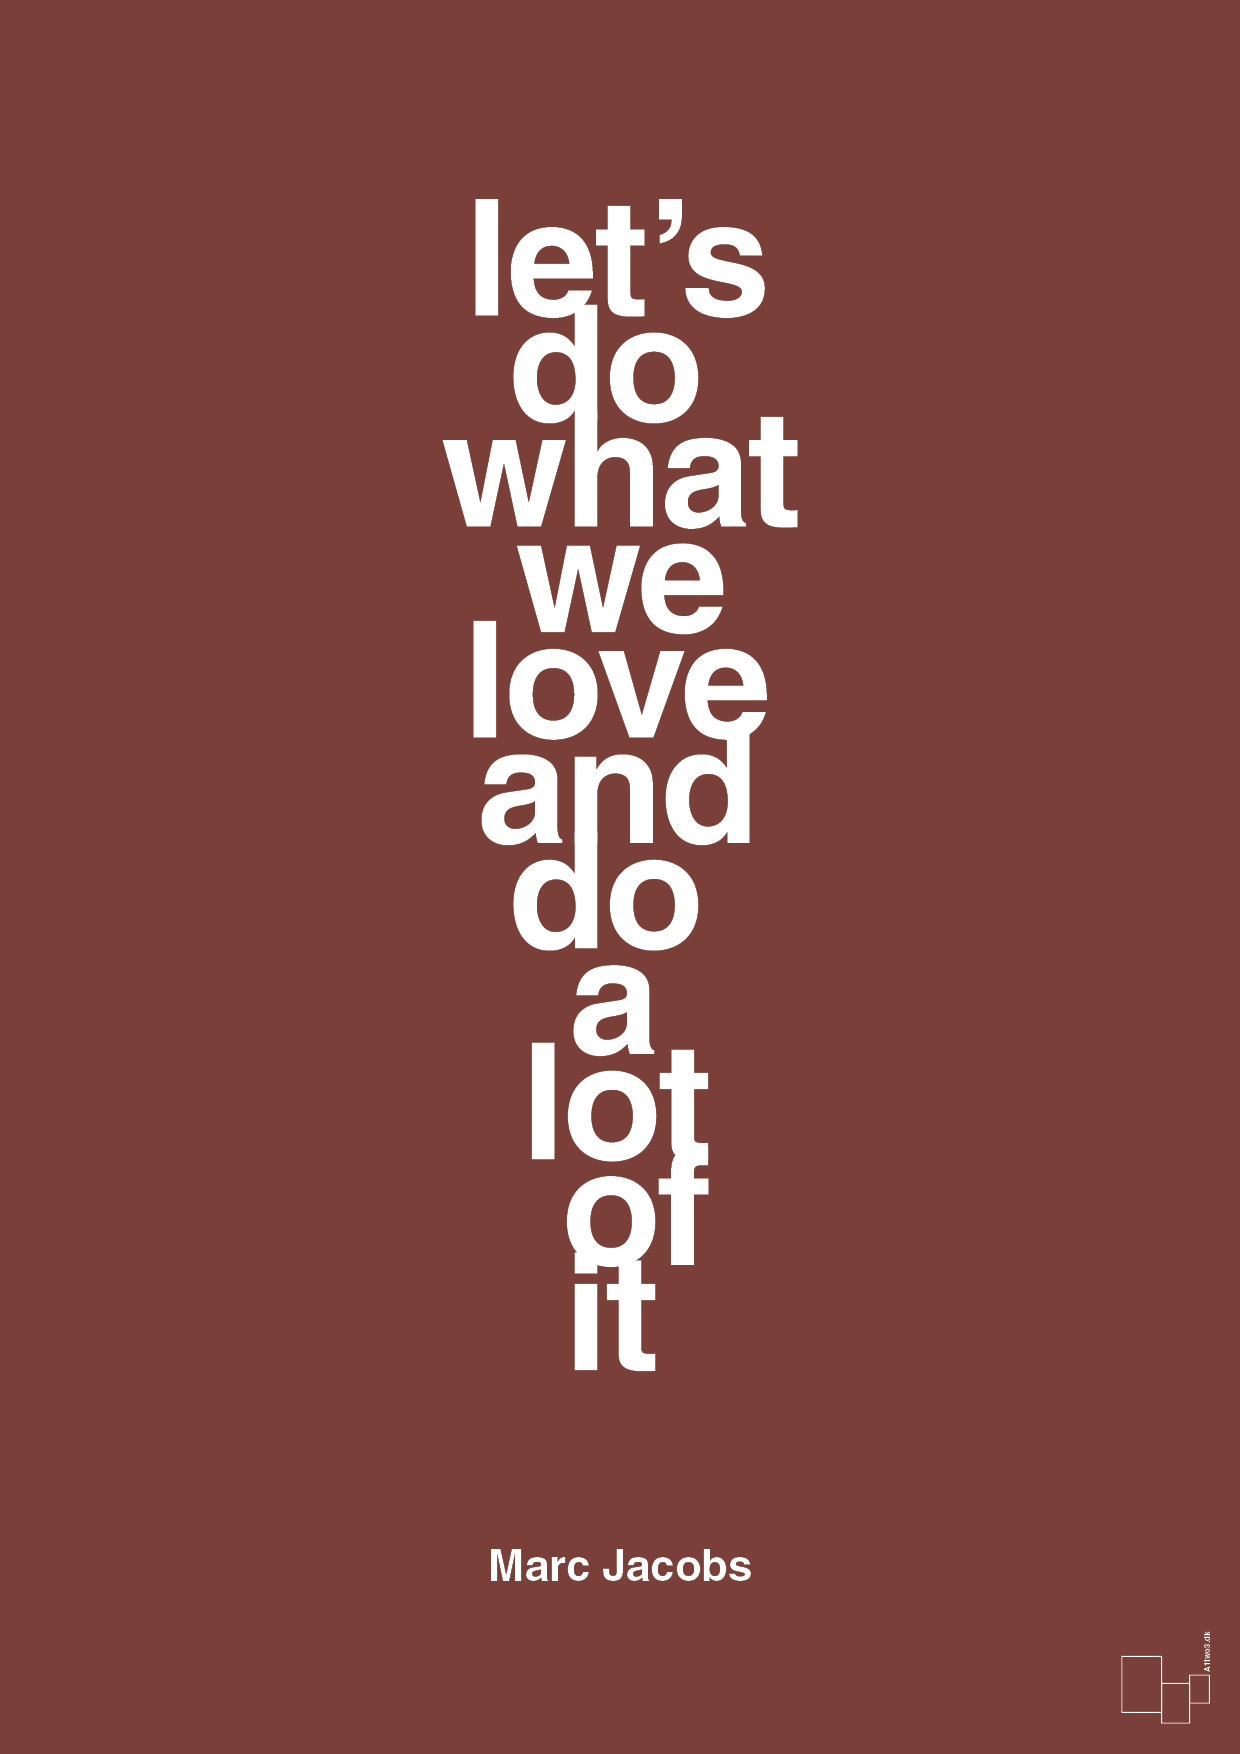 lets do what we love and do a lot of it - Plakat med Citater i Red Pepper